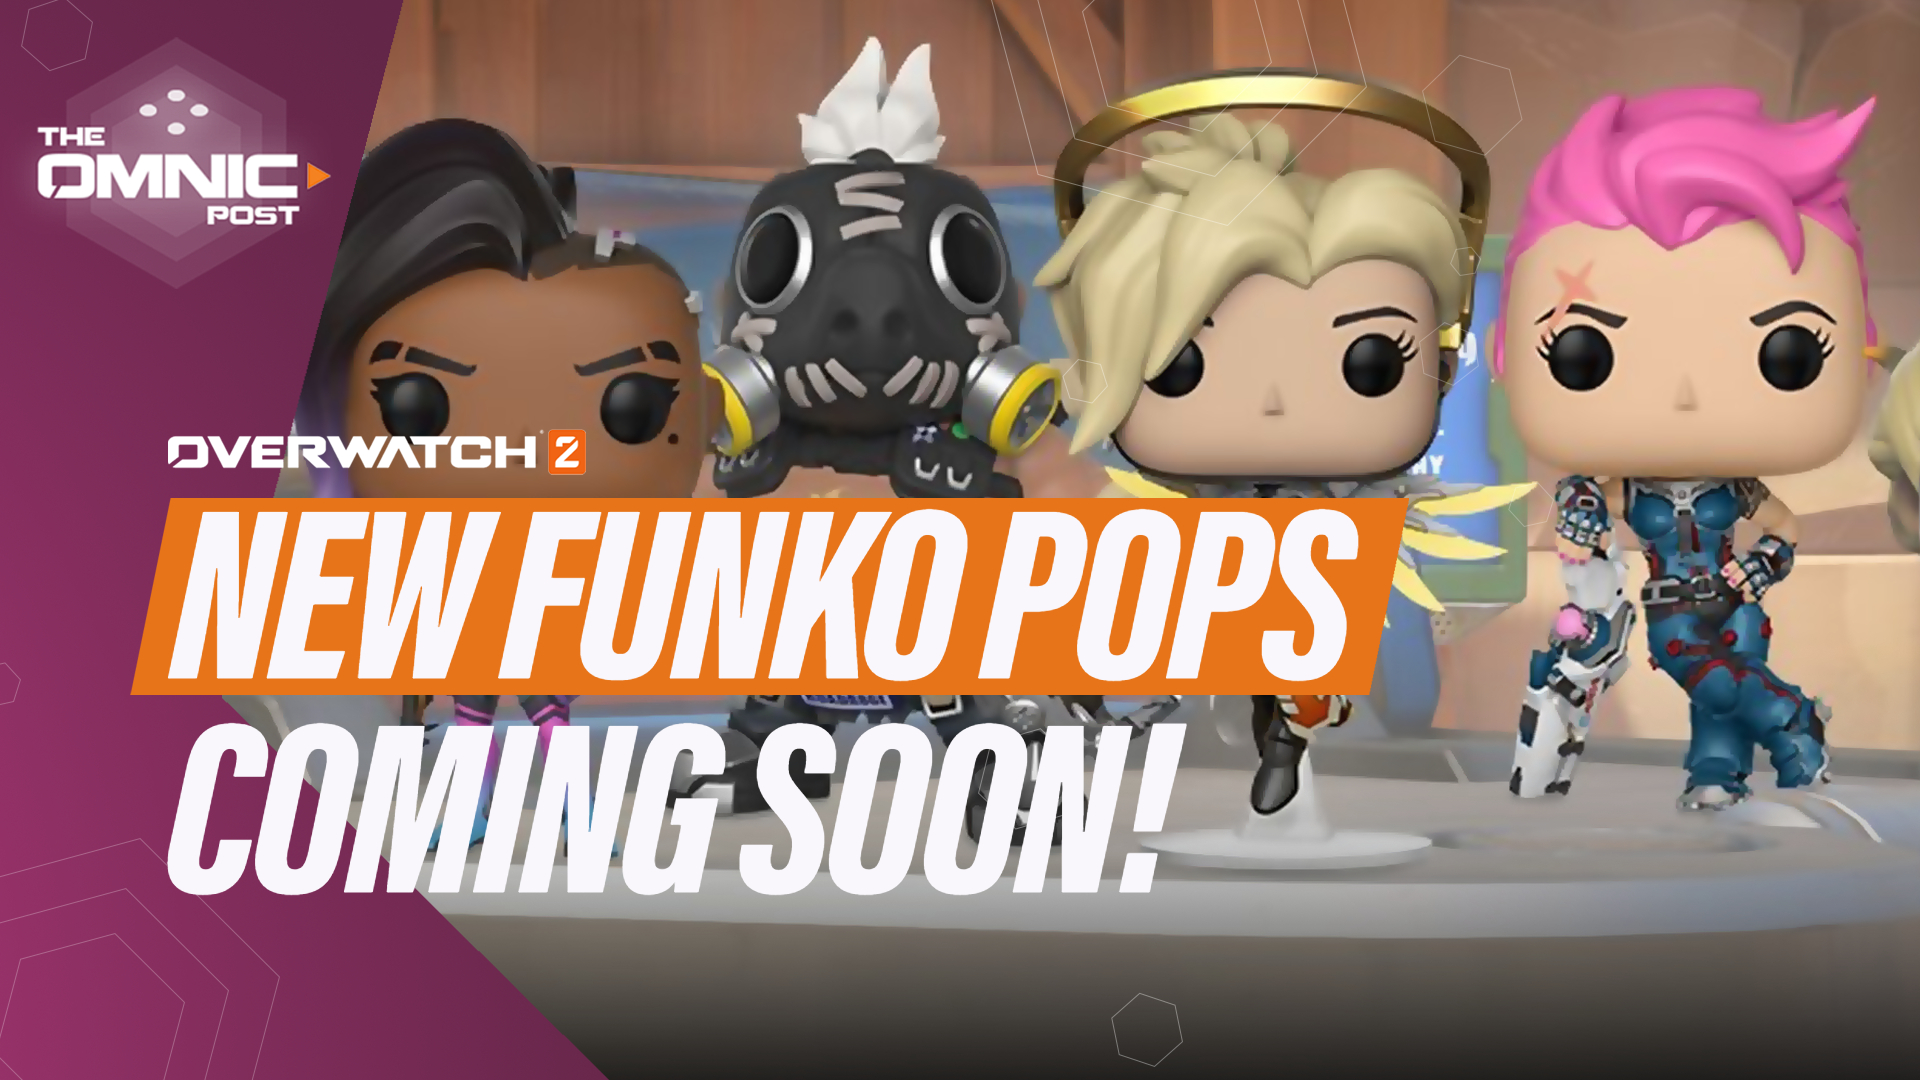 The Omnic Post on Twitter: "According to some sources, a new series of Overwatch 2 Funko Pops should be soon. The includes new versions of Reaper, Lucio, and Cassidy.